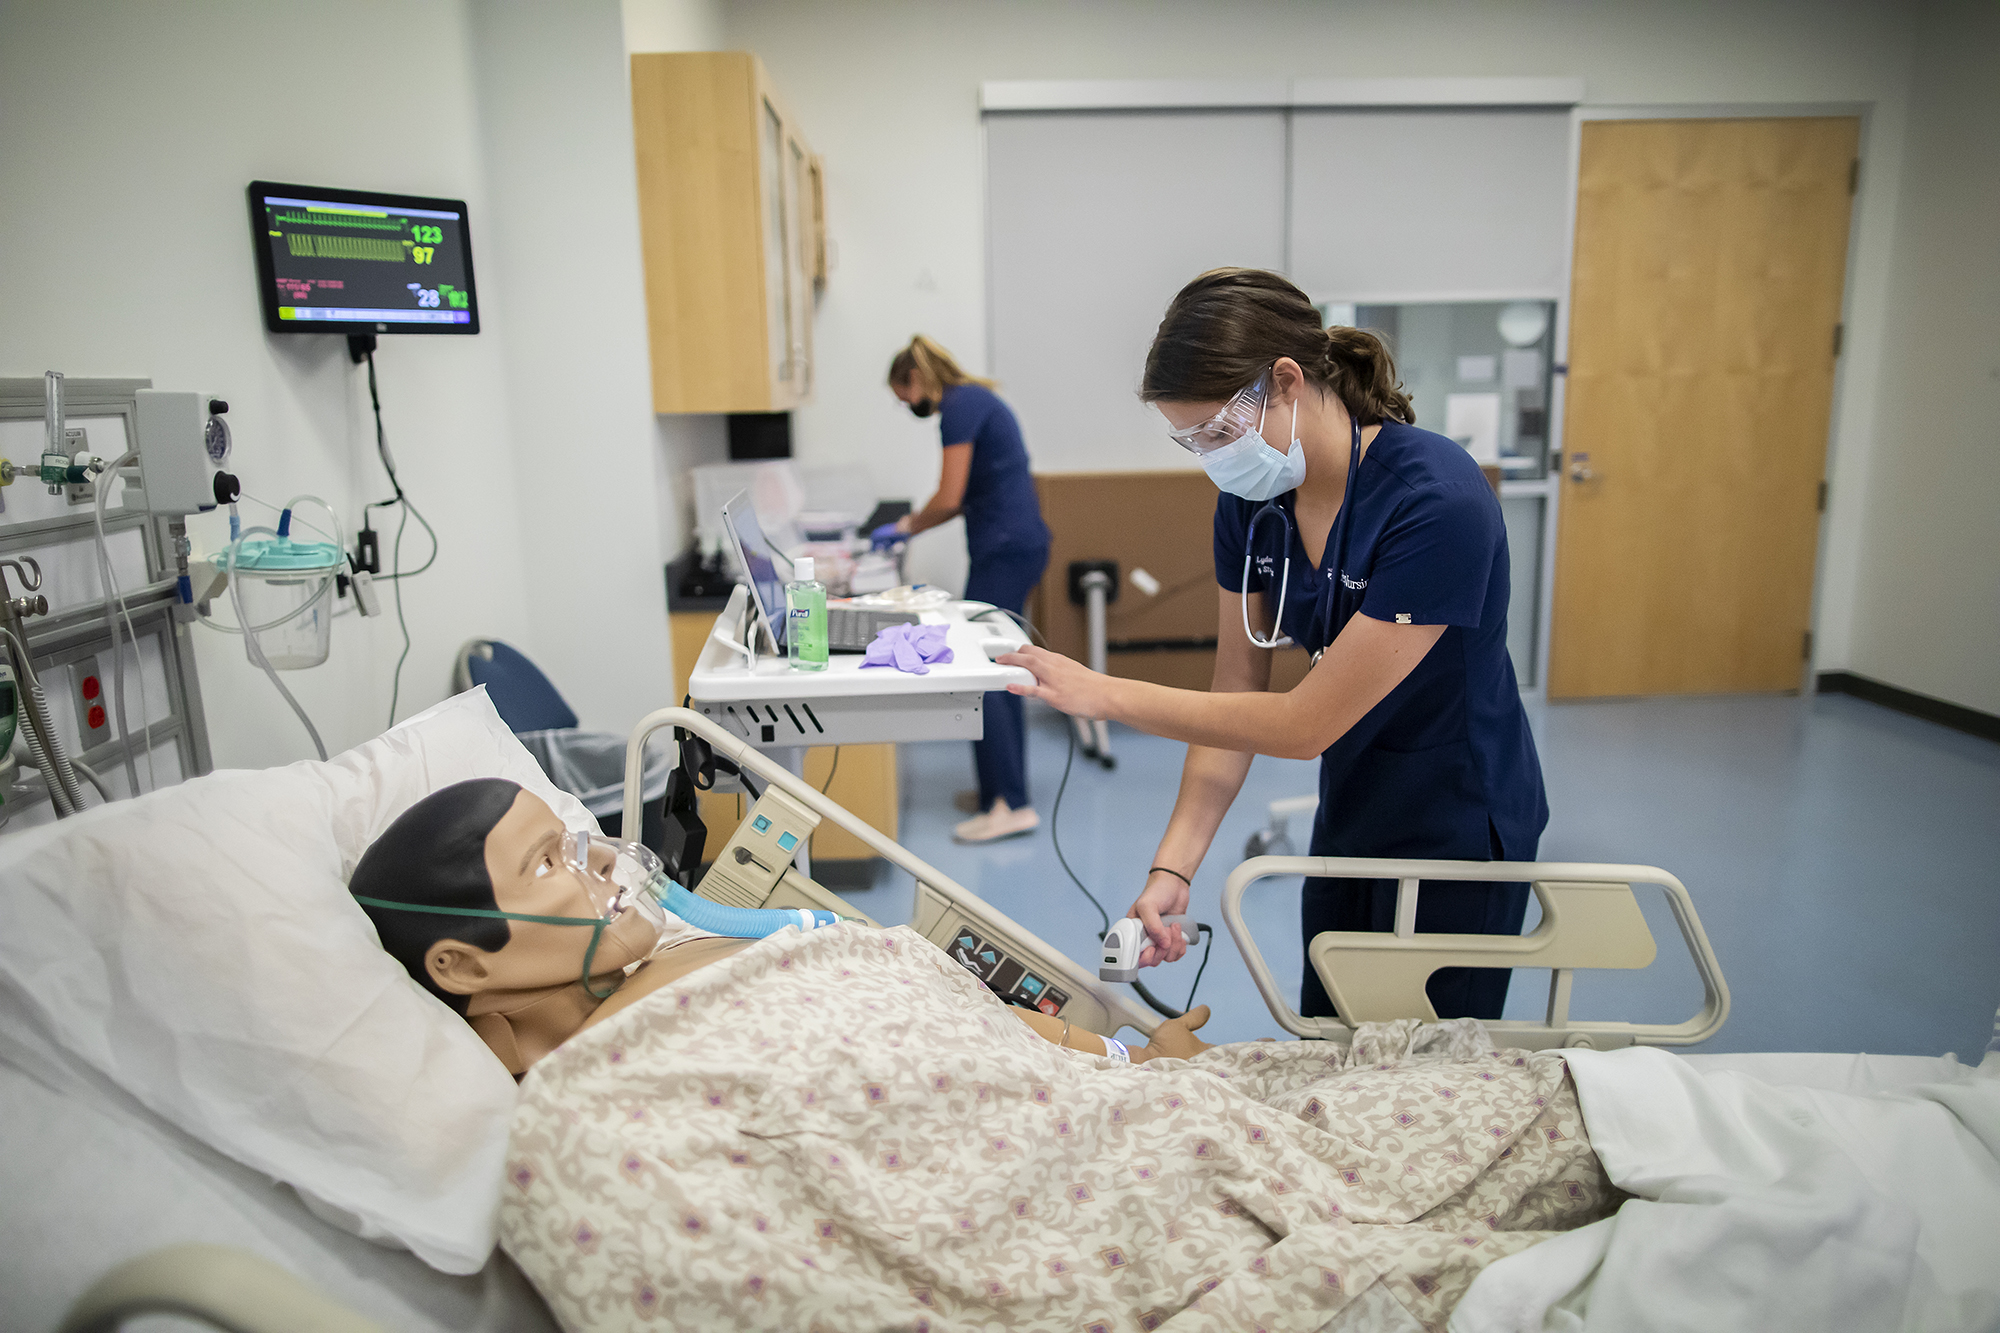 Med students wearing face masks work bedside with dummy patients during COVID.